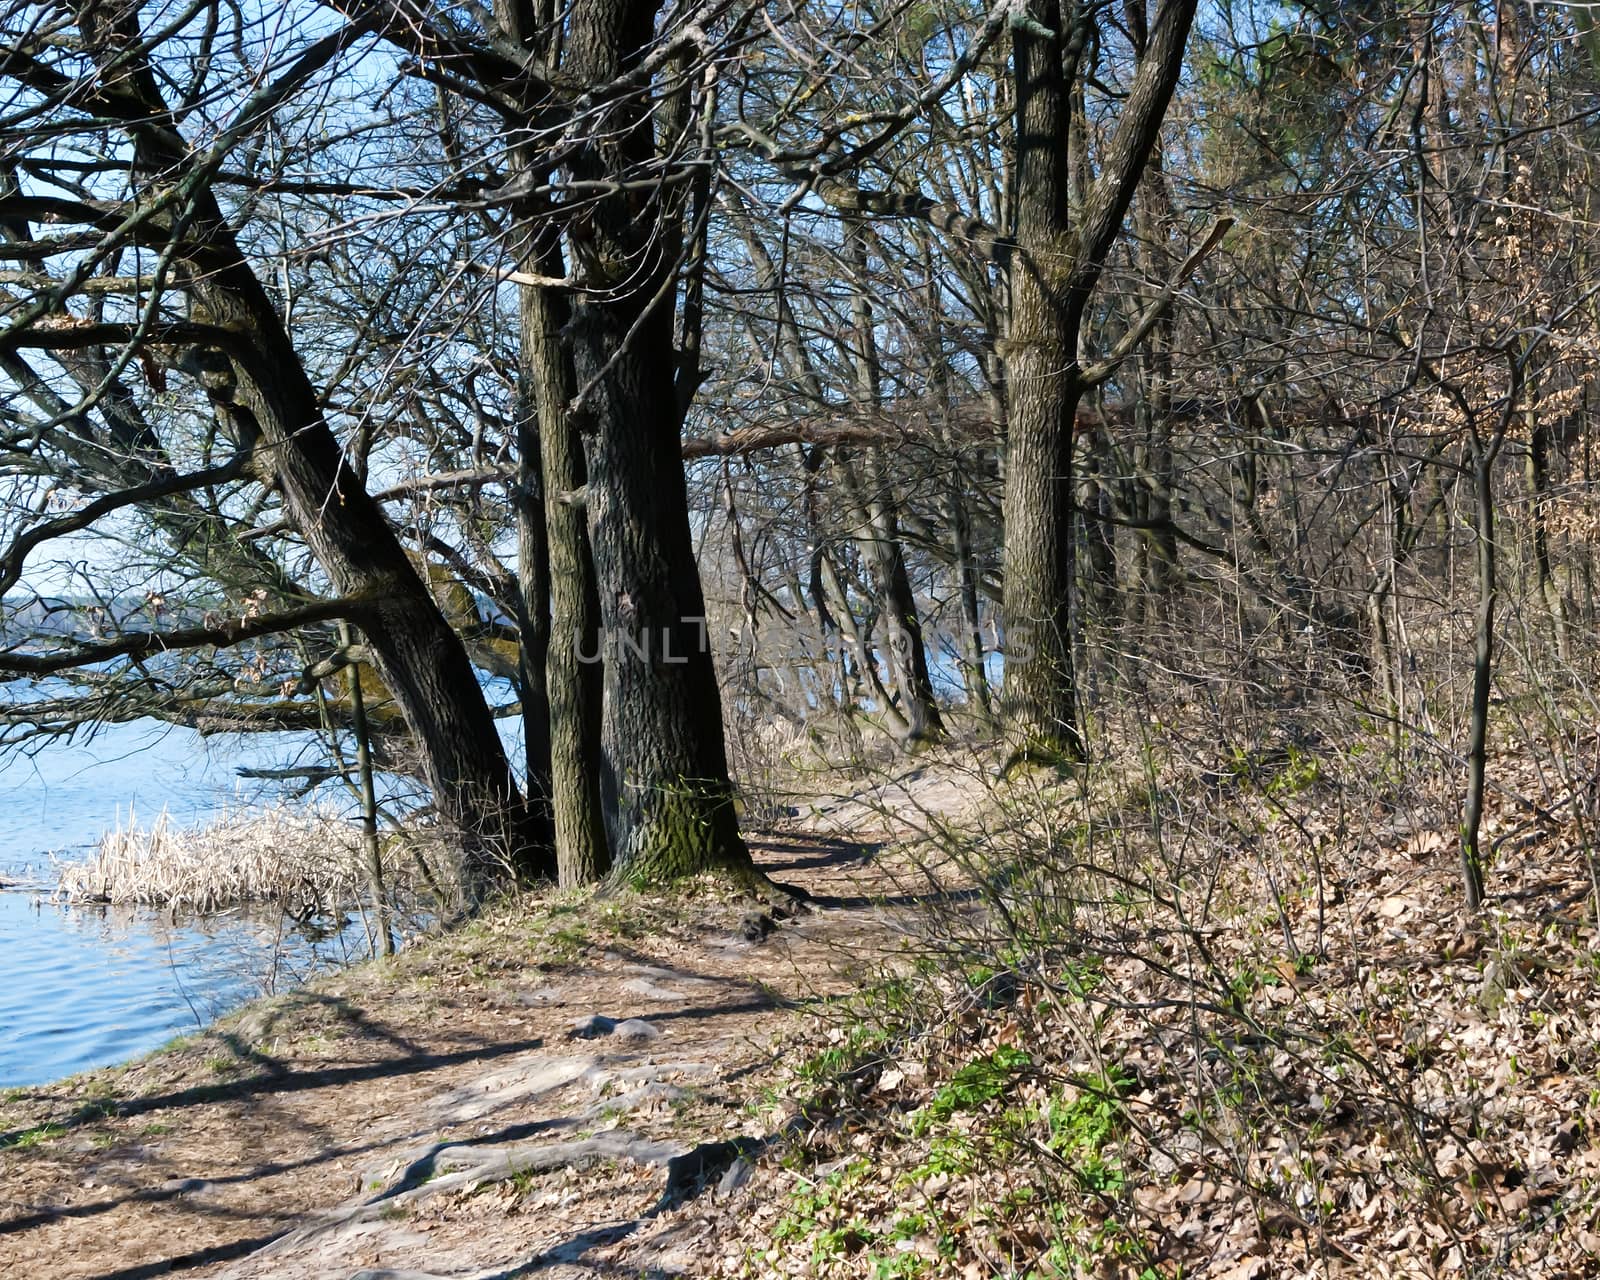 Path along the river, trees and blue sky, spring